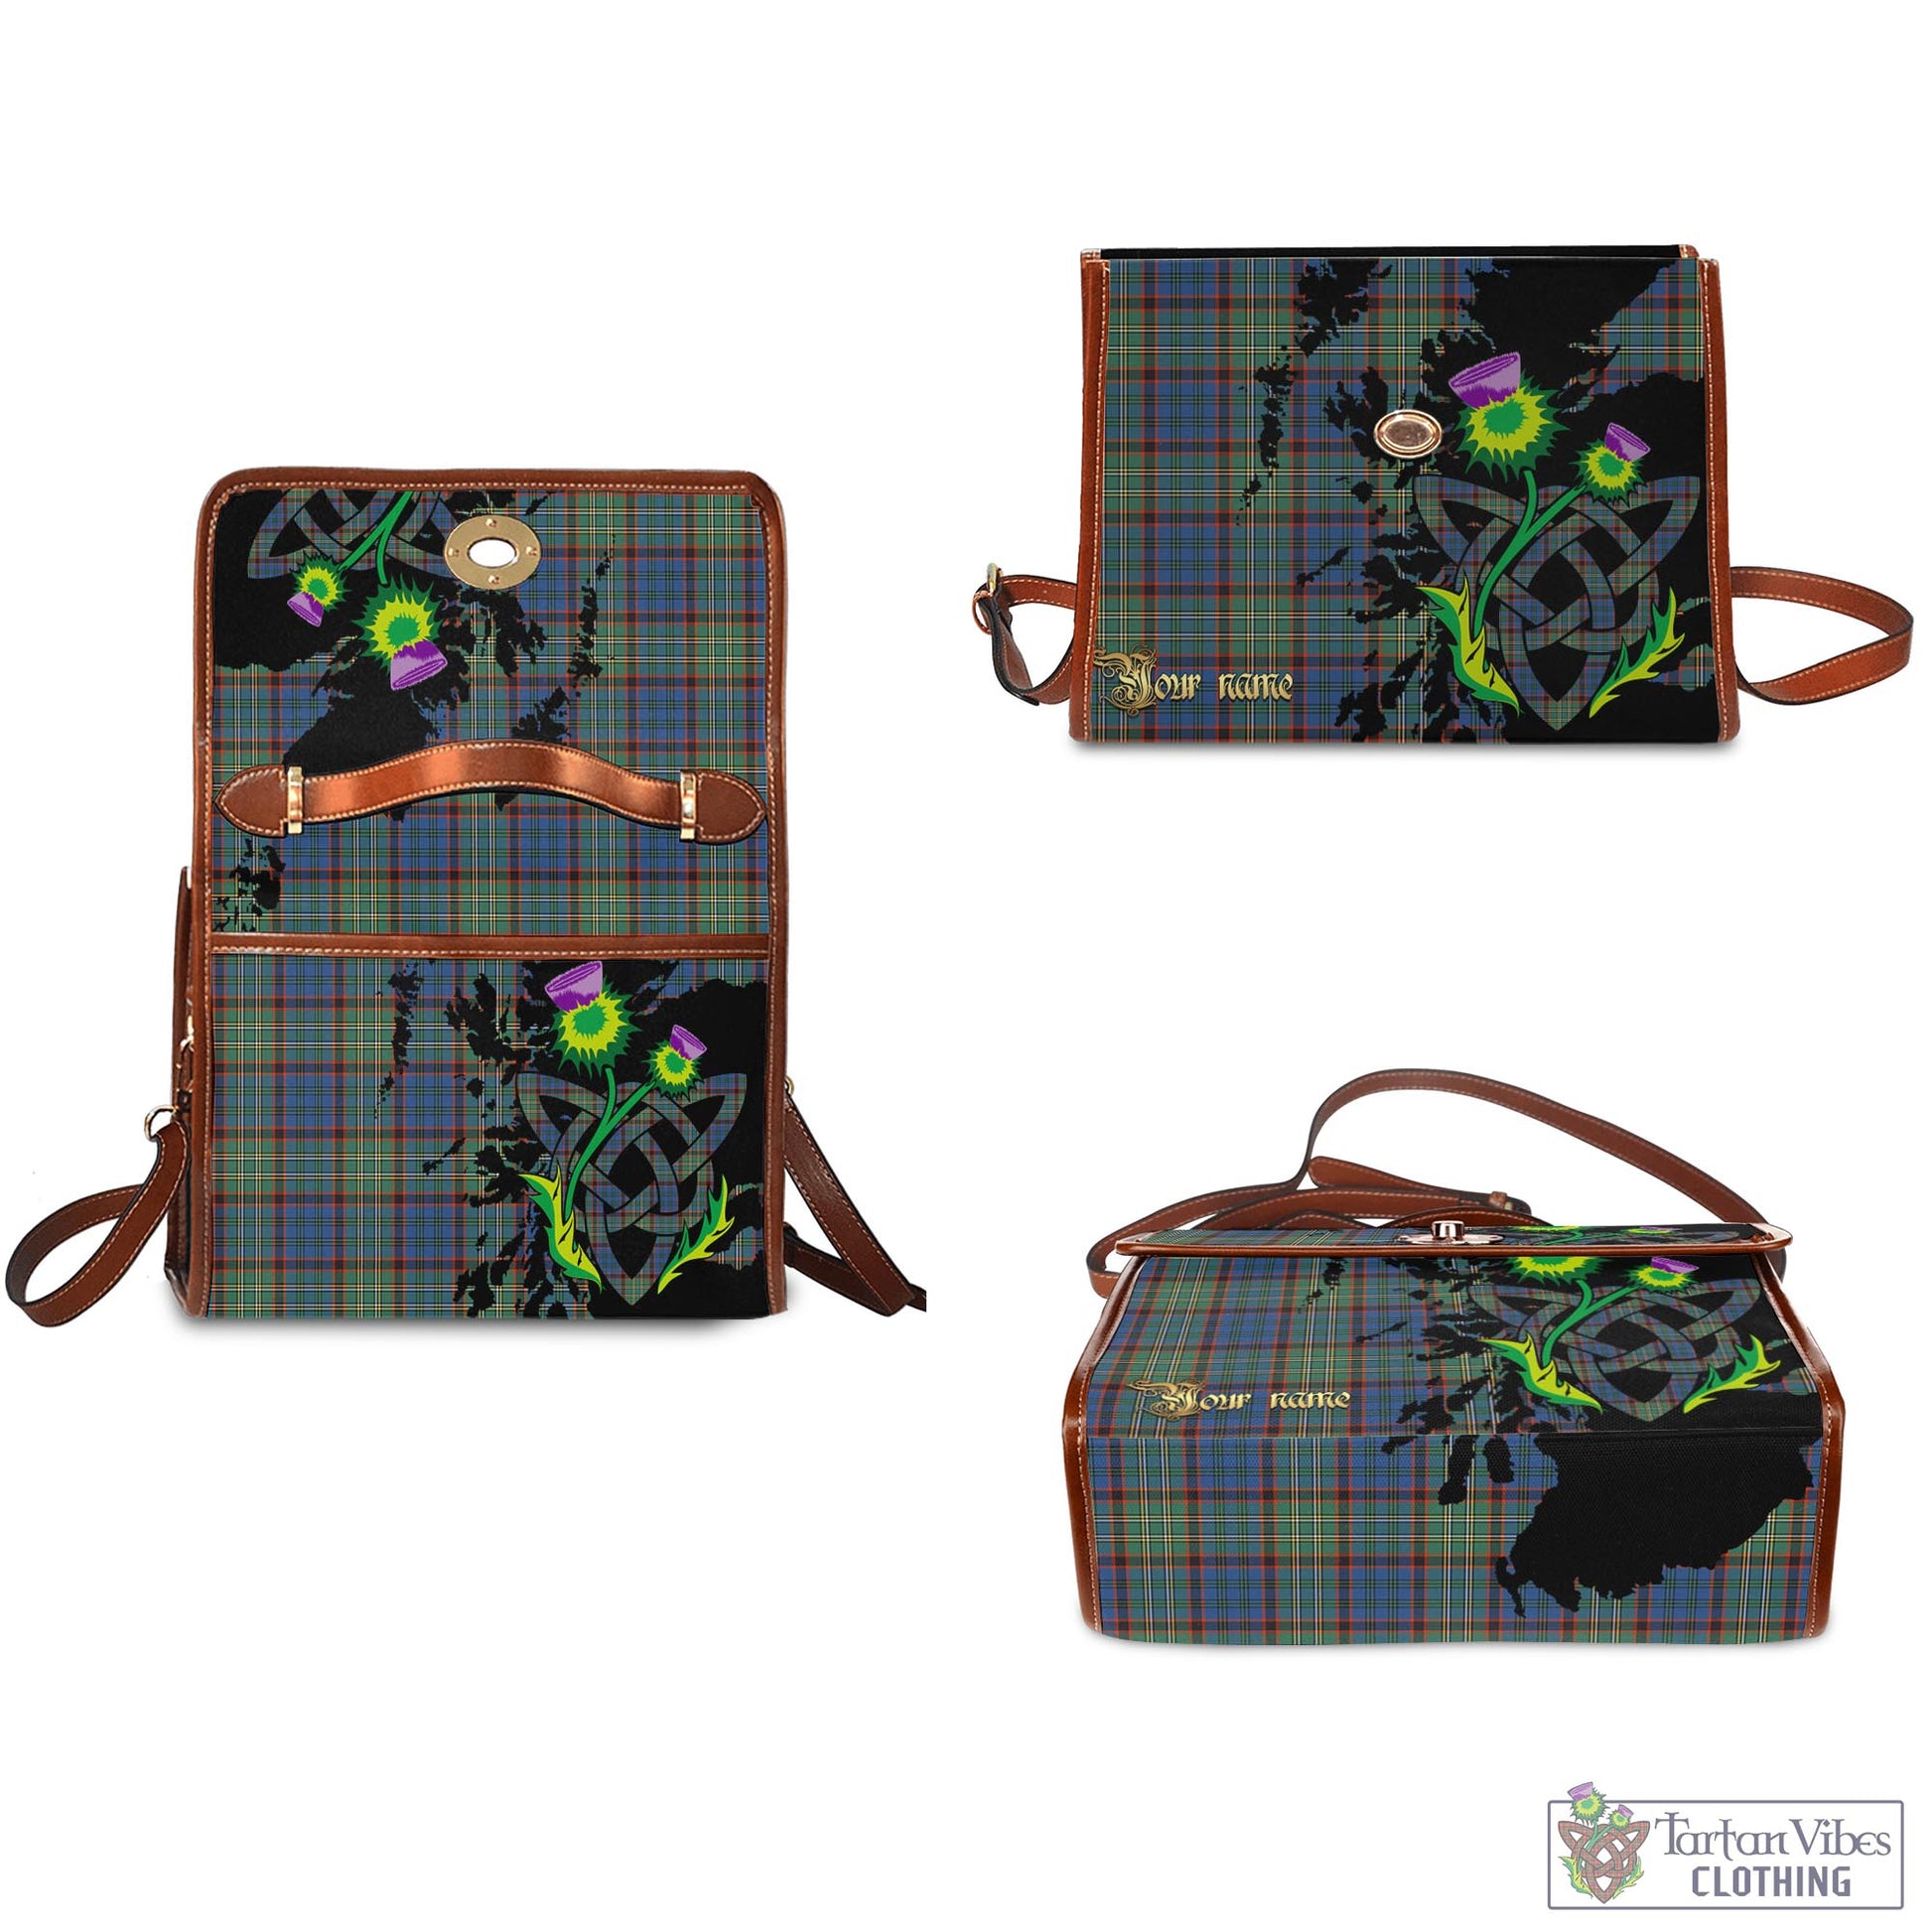 Tartan Vibes Clothing Nicolson Hunting Ancient Tartan Waterproof Canvas Bag with Scotland Map and Thistle Celtic Accents